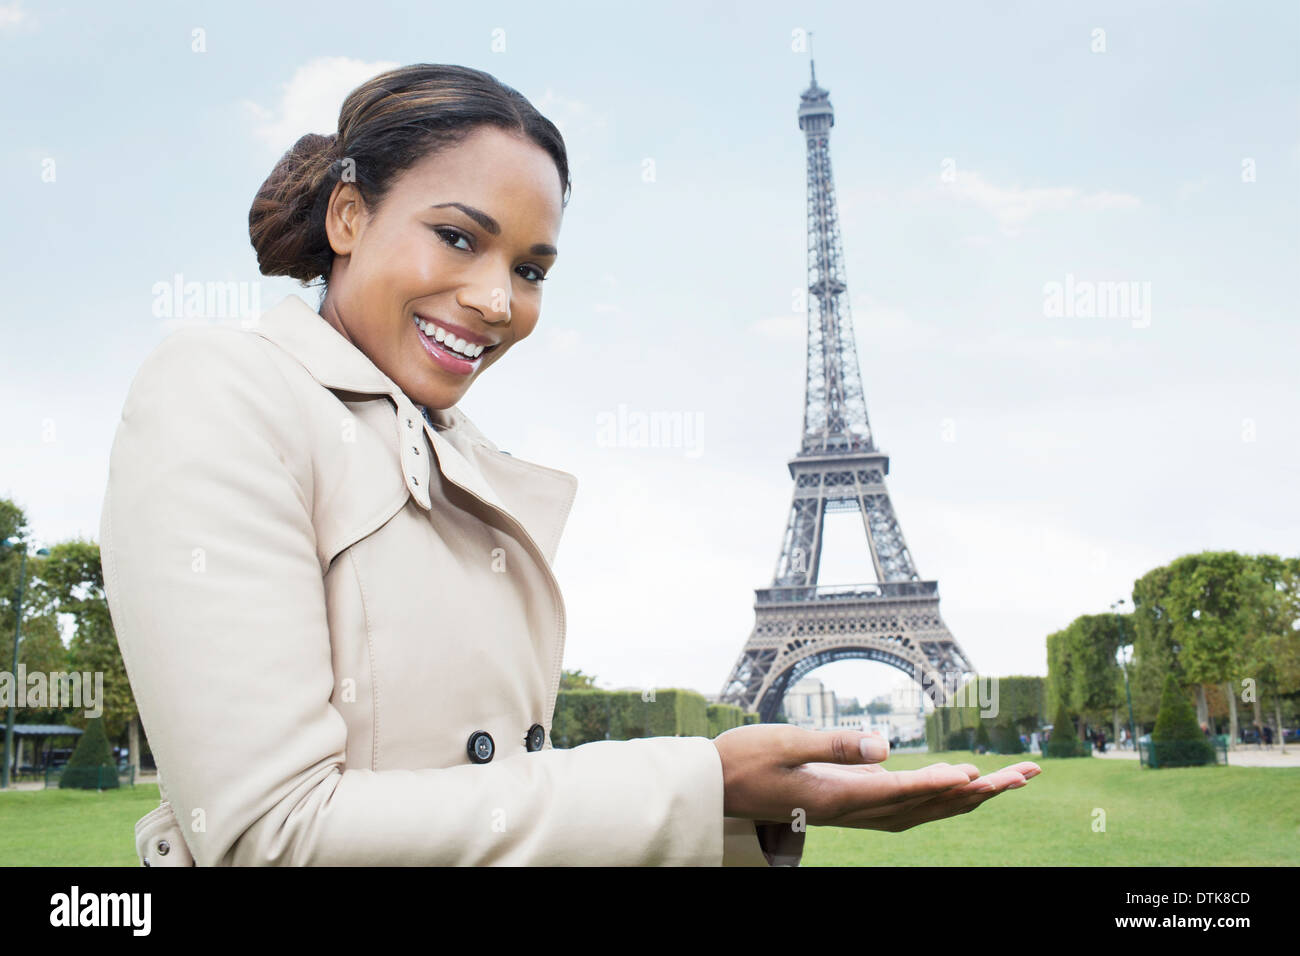 woman posing as if holding the eiffel tower in hands paris france DTK8CD